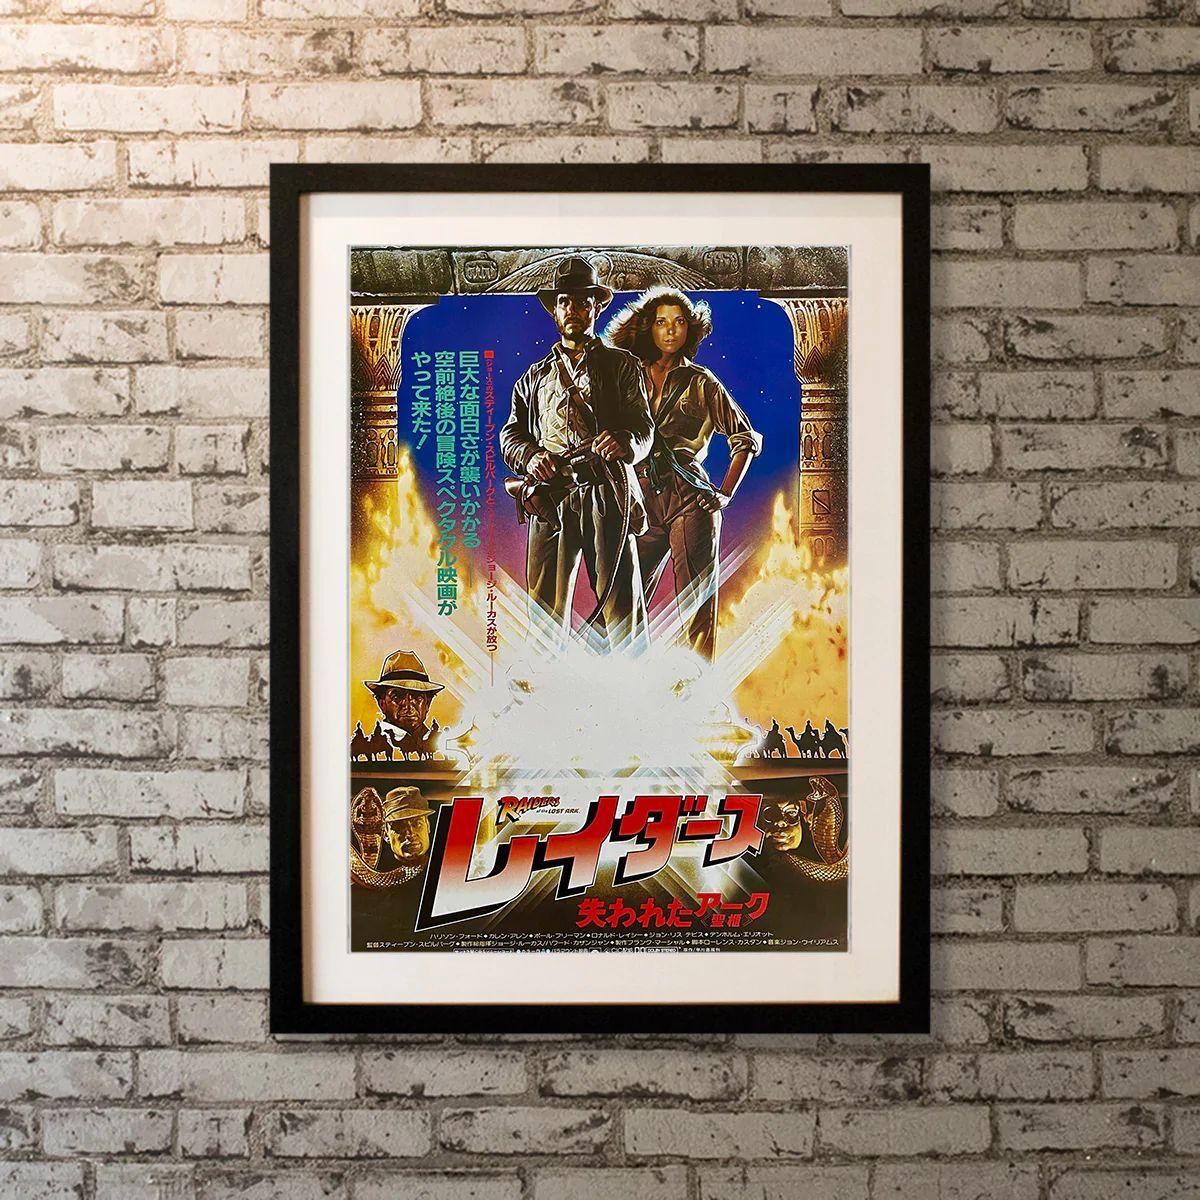 Raiders of The Lost Ark, Unframed Poster, 1981

Japanese B2 (20 X 29 Inches). Archaeology professor Indiana Jones ventures to seize a biblical artefact known as the Ark of the Covenant. While doing so, he puts up a fight against Renee and a troop